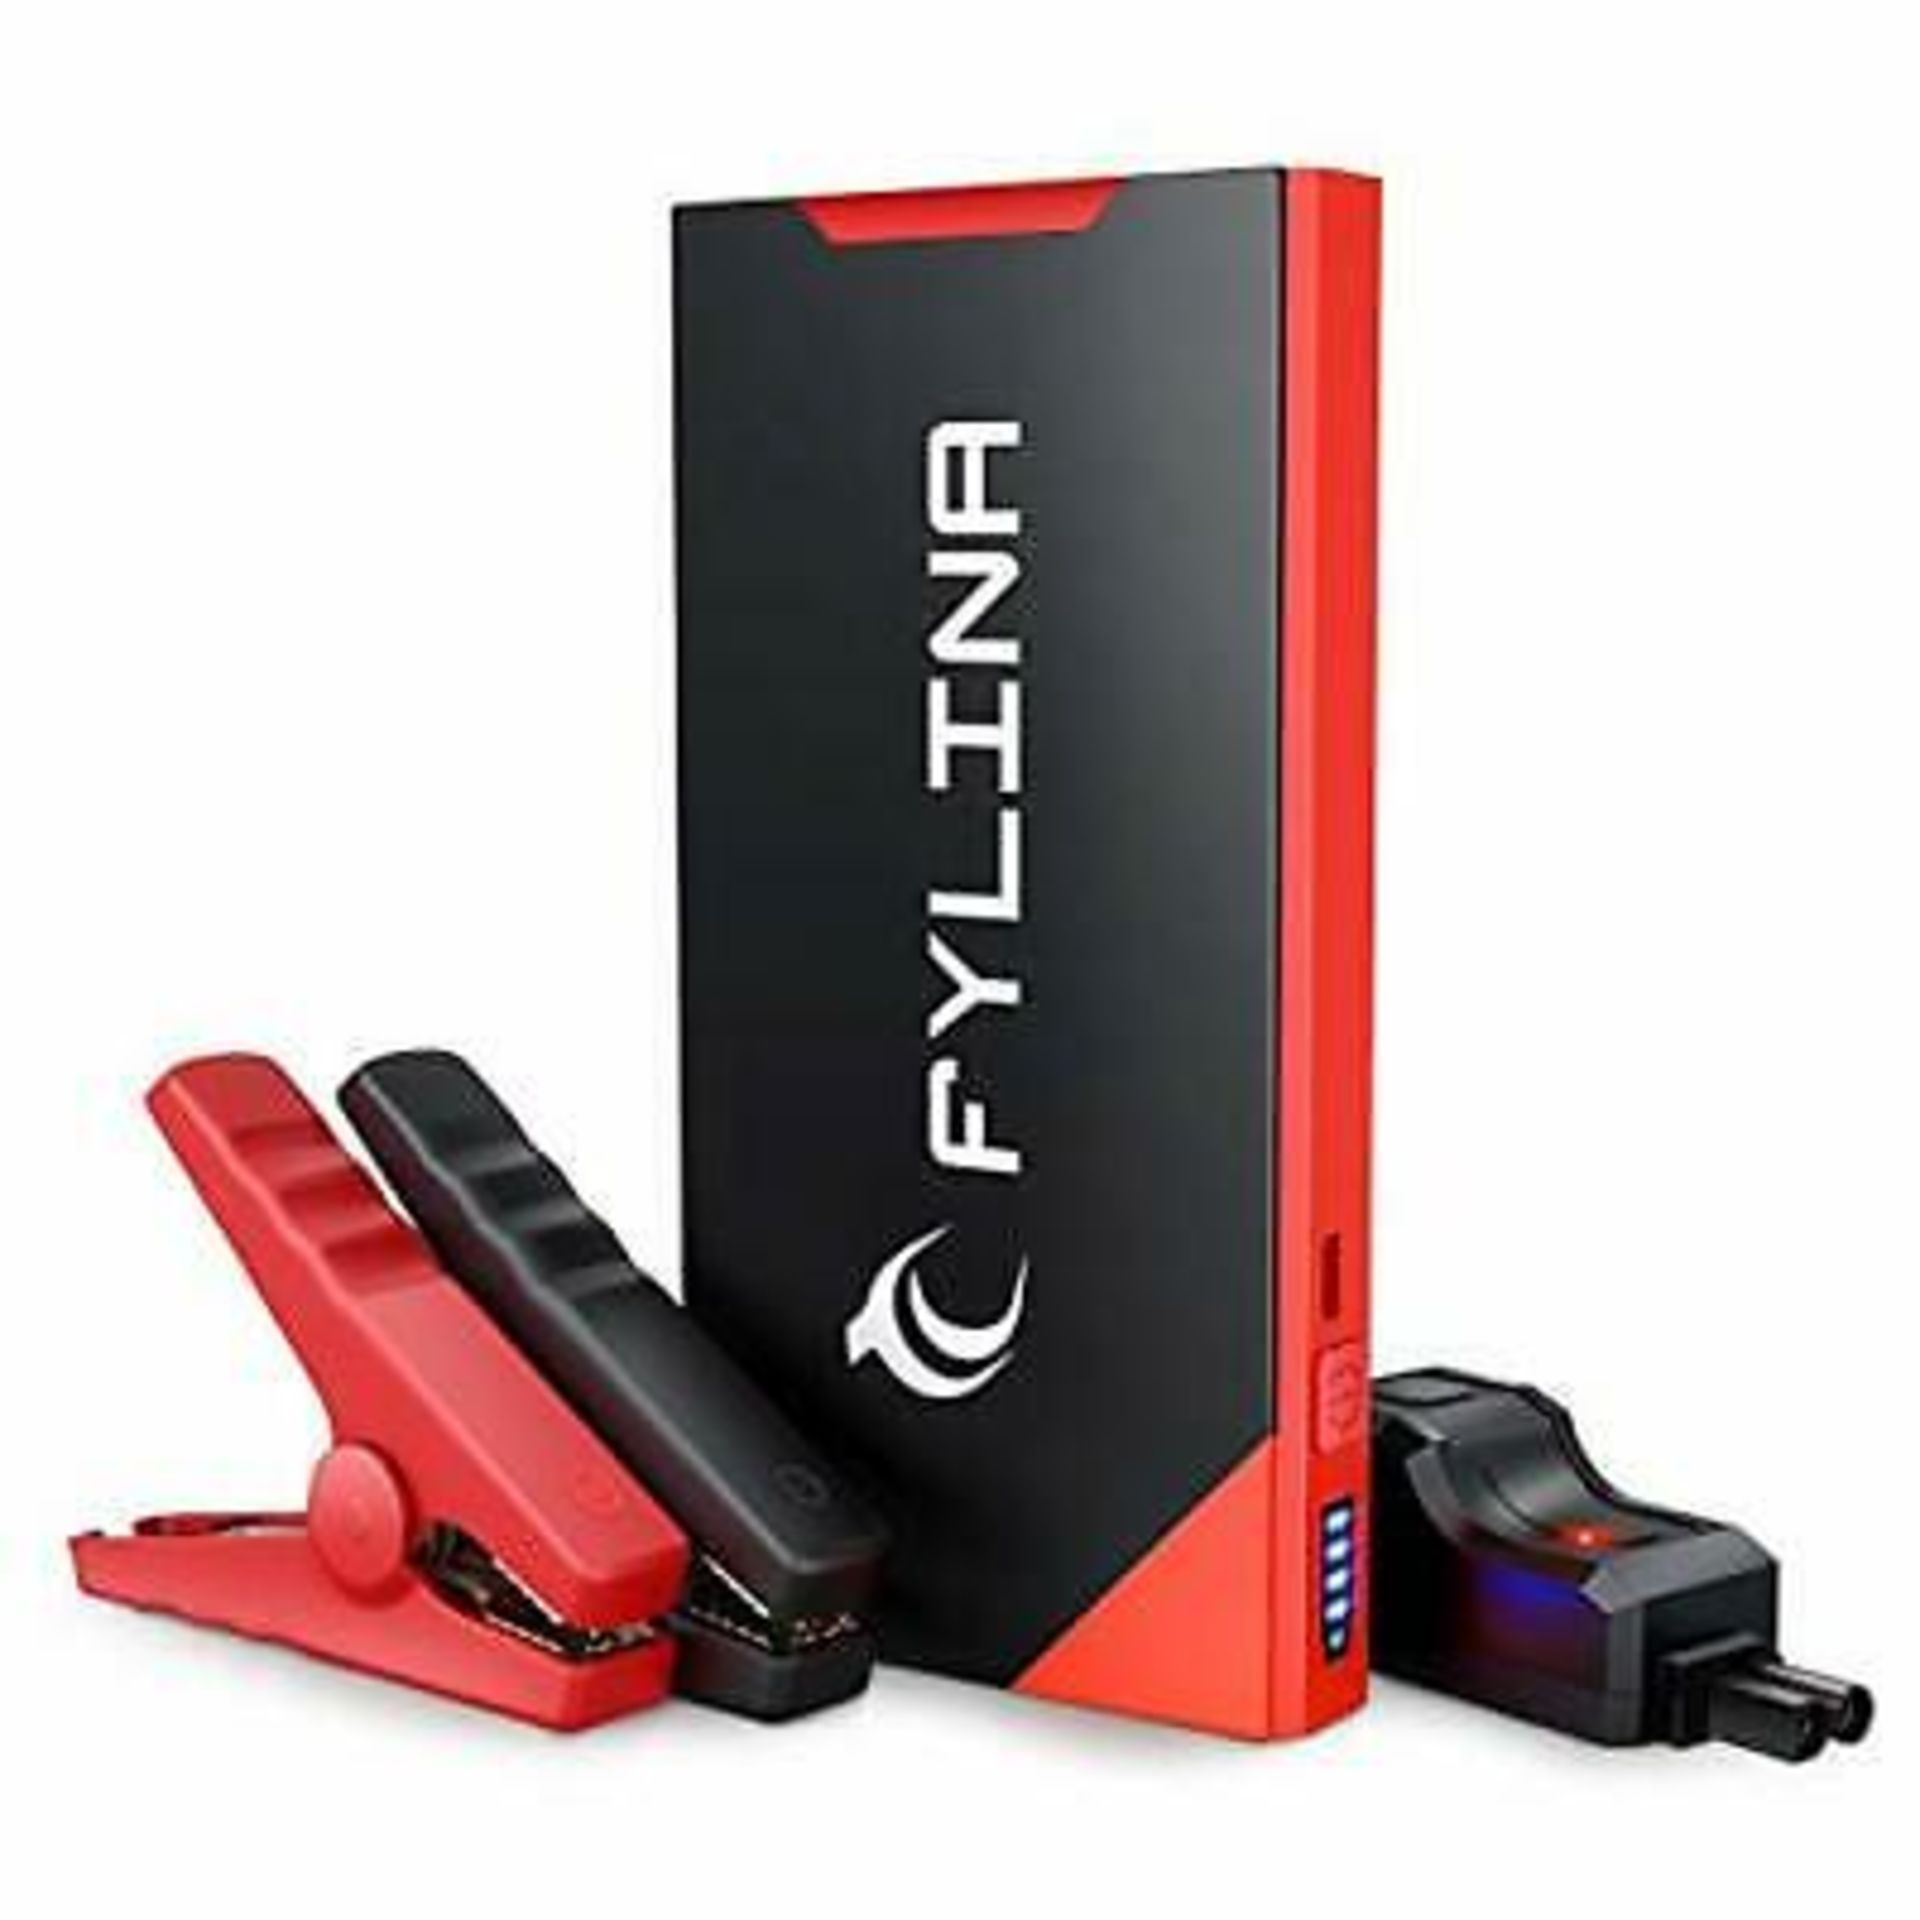 BOXED FYLINA JUMP STARTER, POWER BANK, LAPTOP CHARGER, LED LIGHTS RRP £72.49Condition